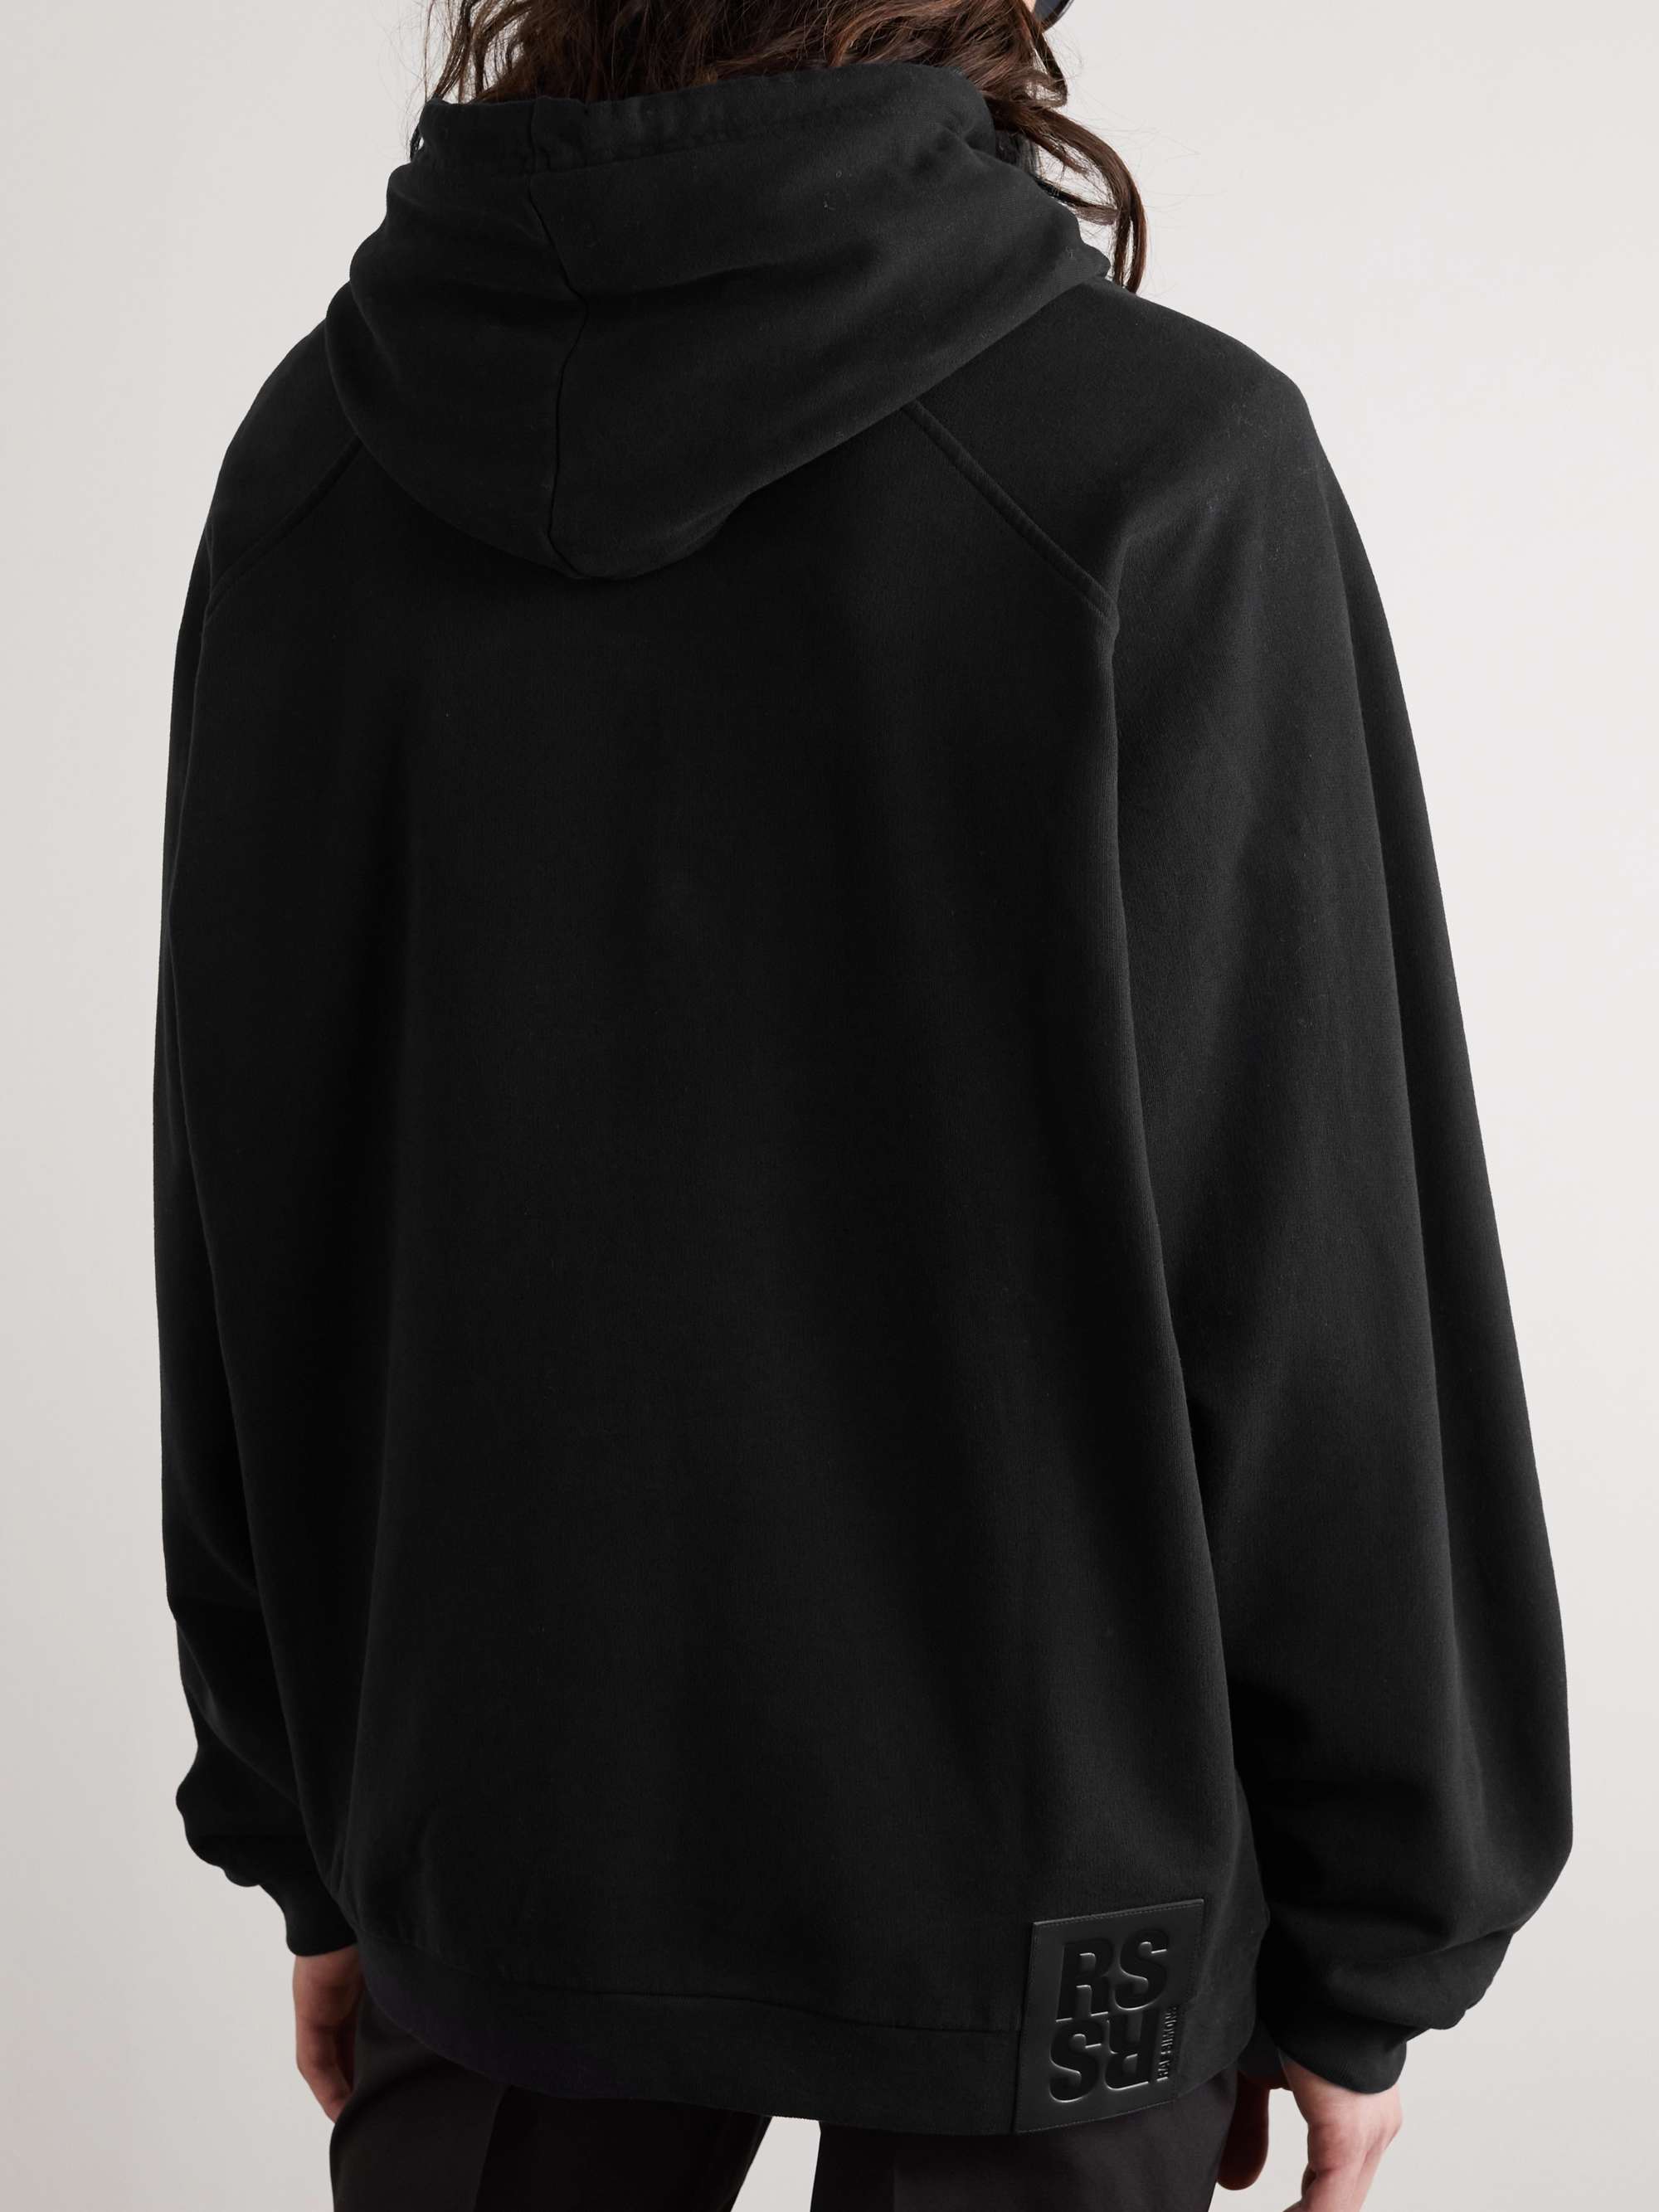 RAF SIMONS Oversized Logo-Embroidered Cotton-Jersey Hoodie for Men | MR ...